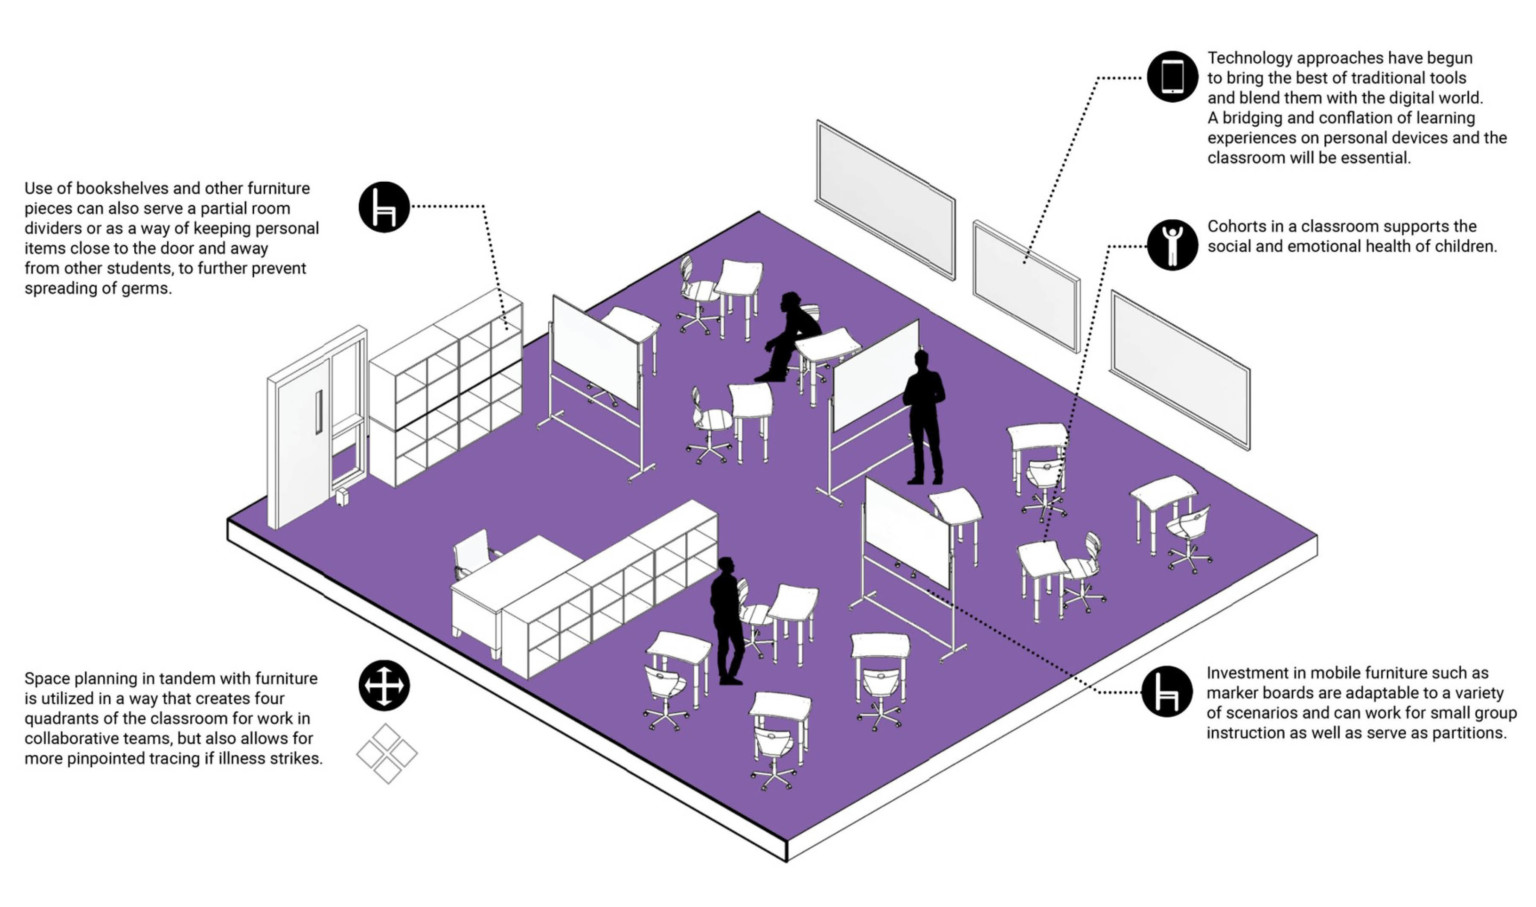 Aerial view of potential classroom solution using existing furniture to form partitions between quadrants